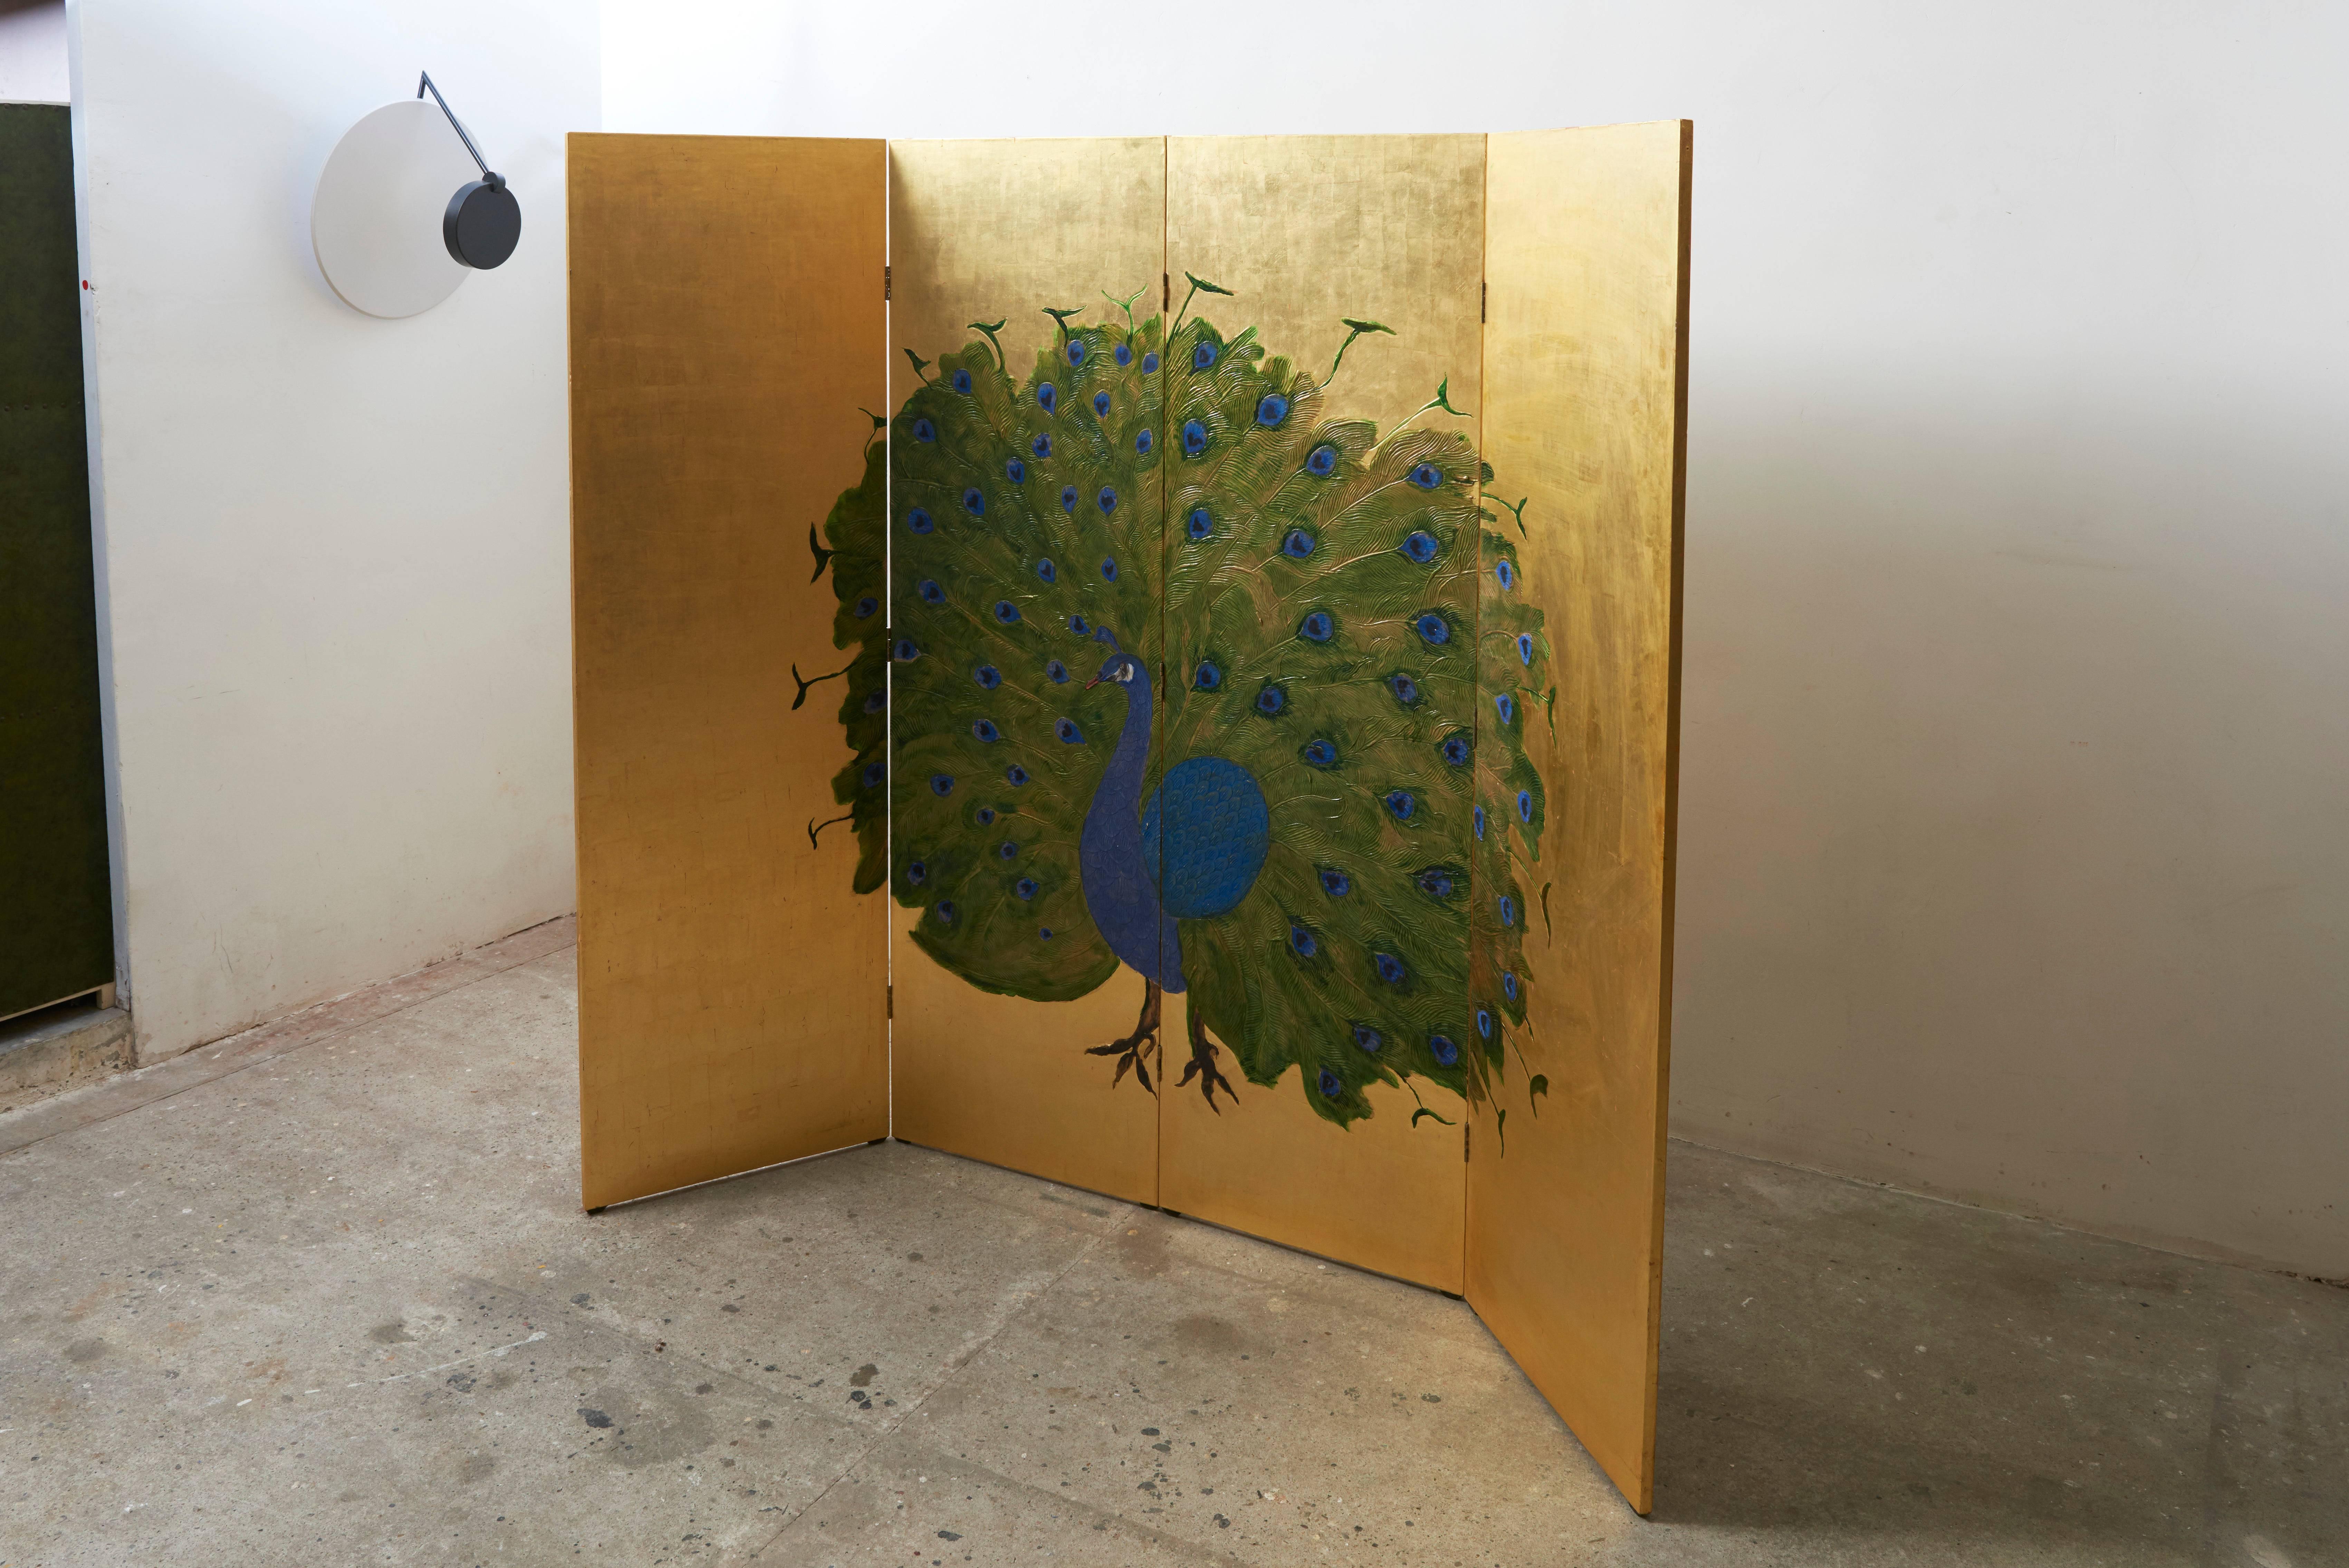 A beautiful double-sided Japanese four-panel screen with a blue peacock in full regalia and a gilt background, on the other side of the screen painted with a Bonsai tree, so it is possible to create two separate natural atmospheres in your interior